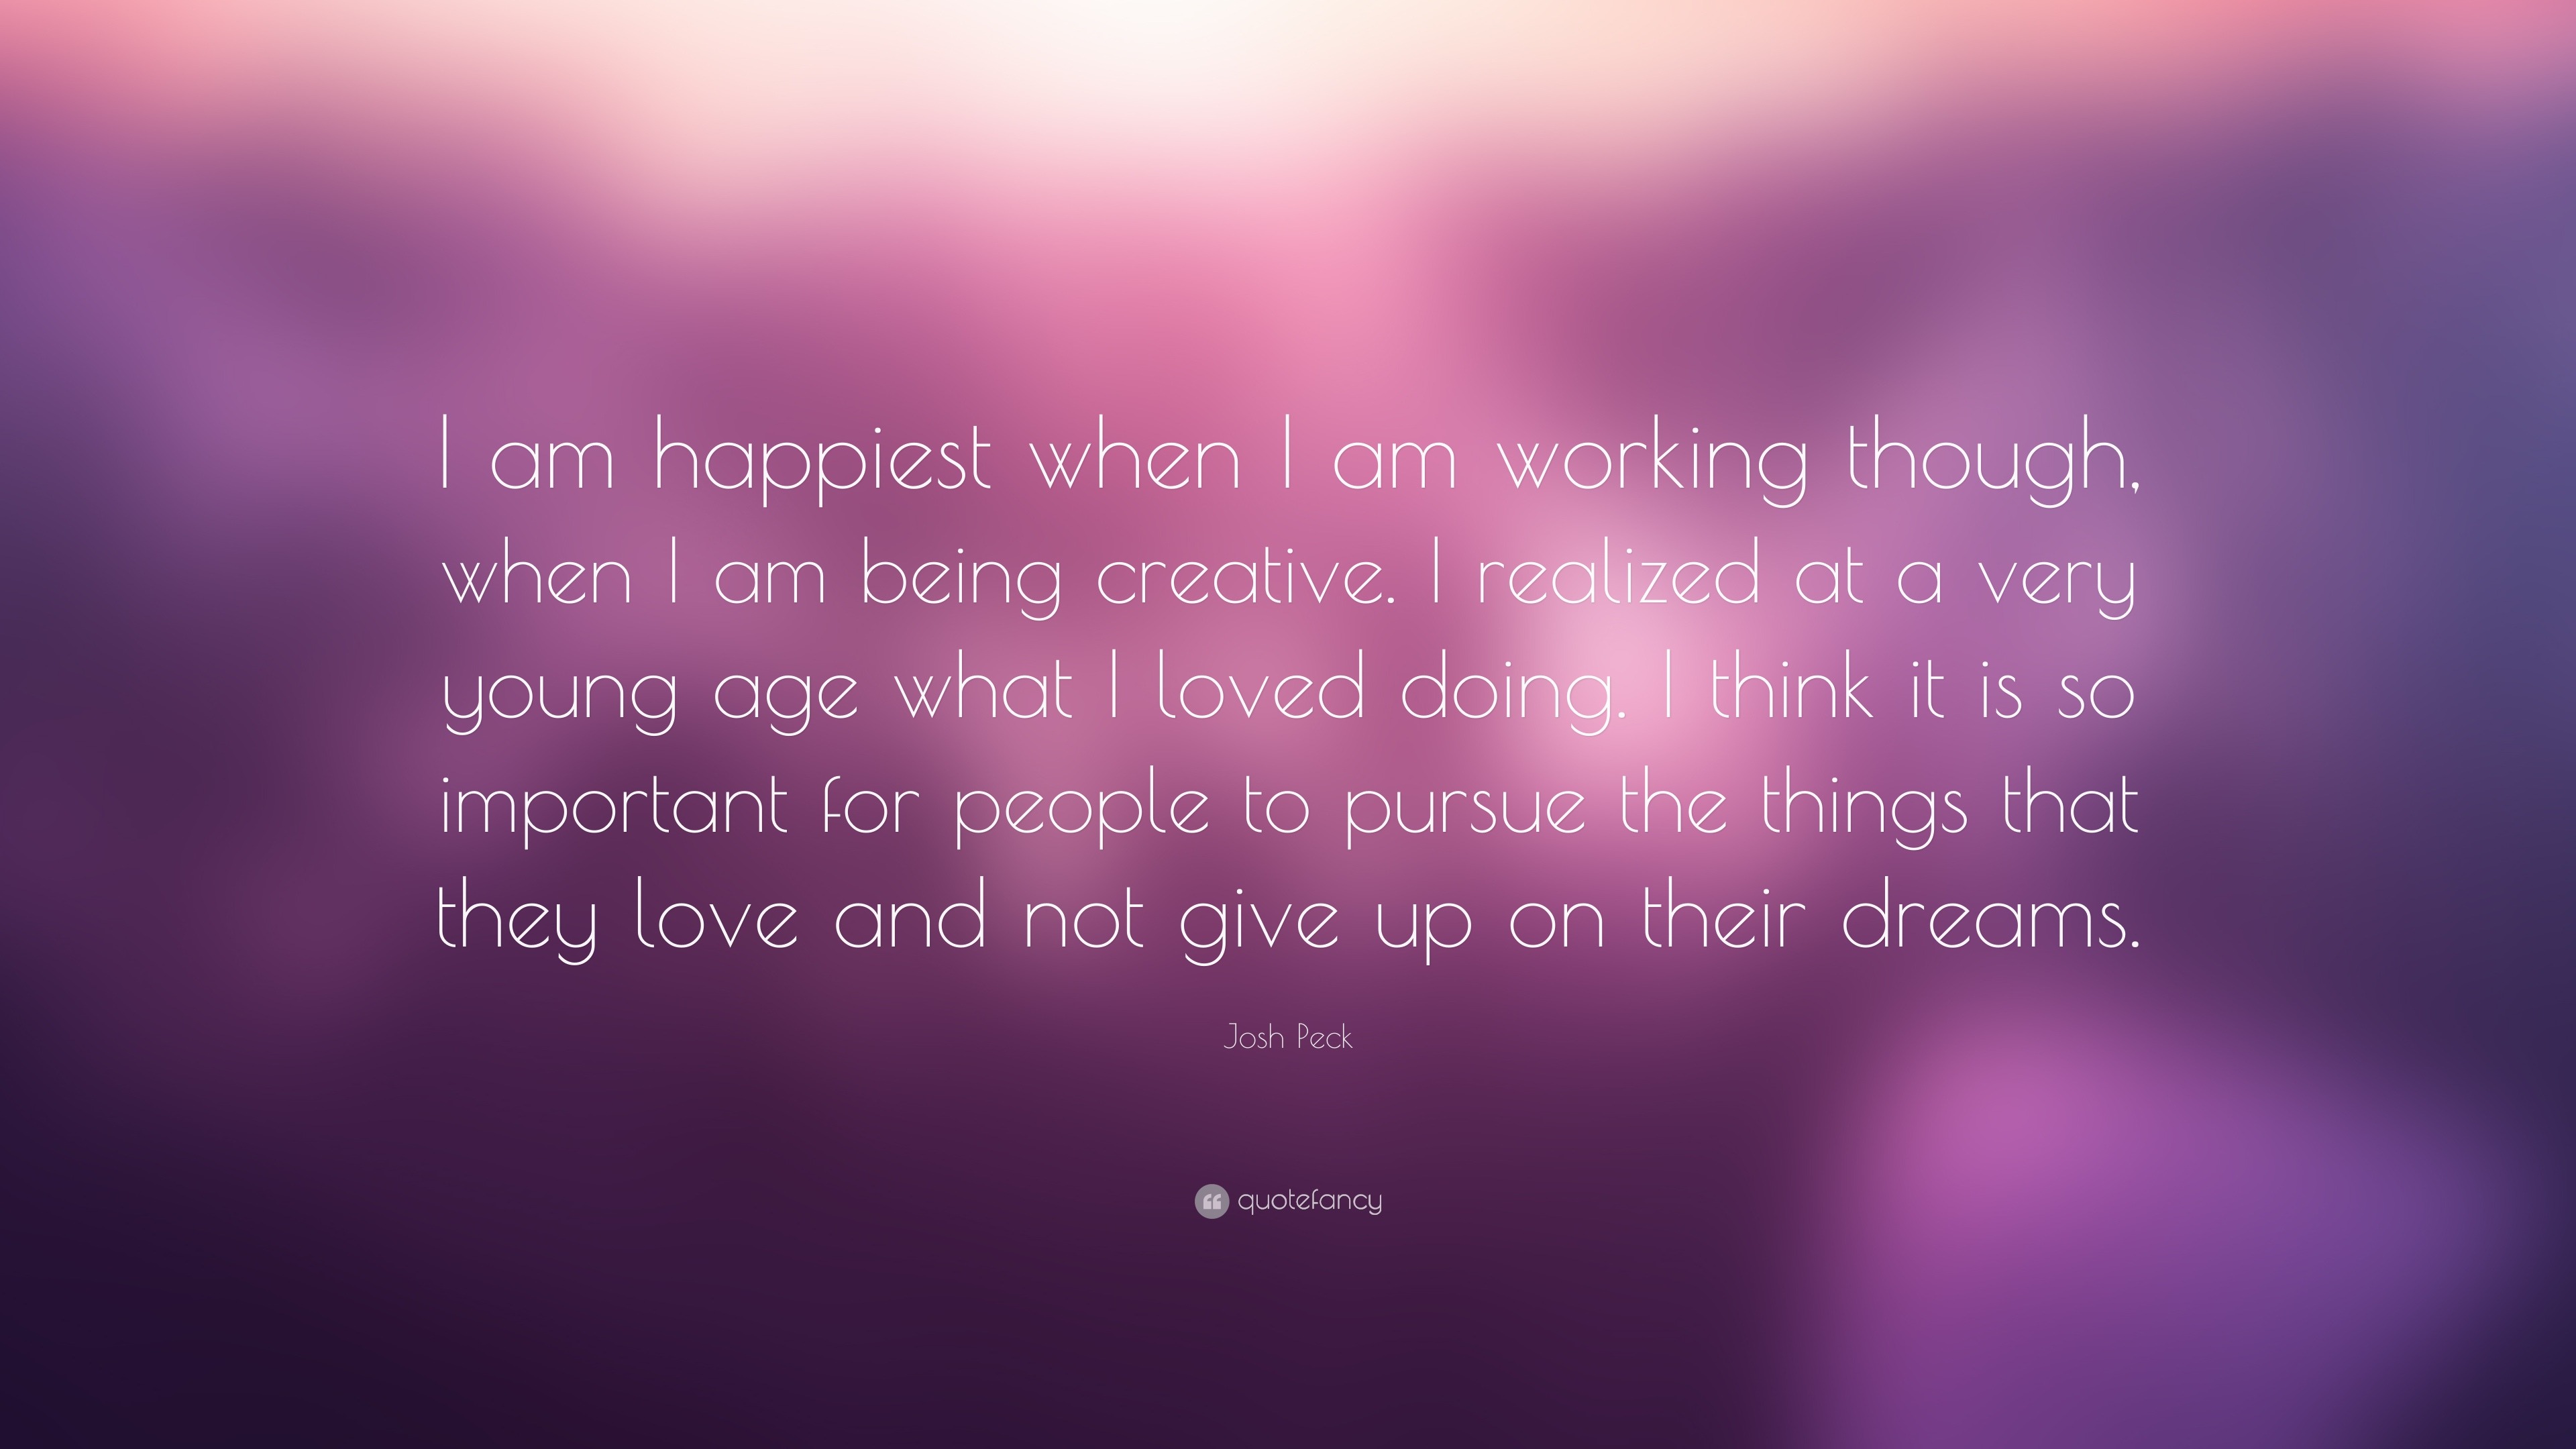 Josh Peck Quote: “I am happiest when I am working though, when I am ...